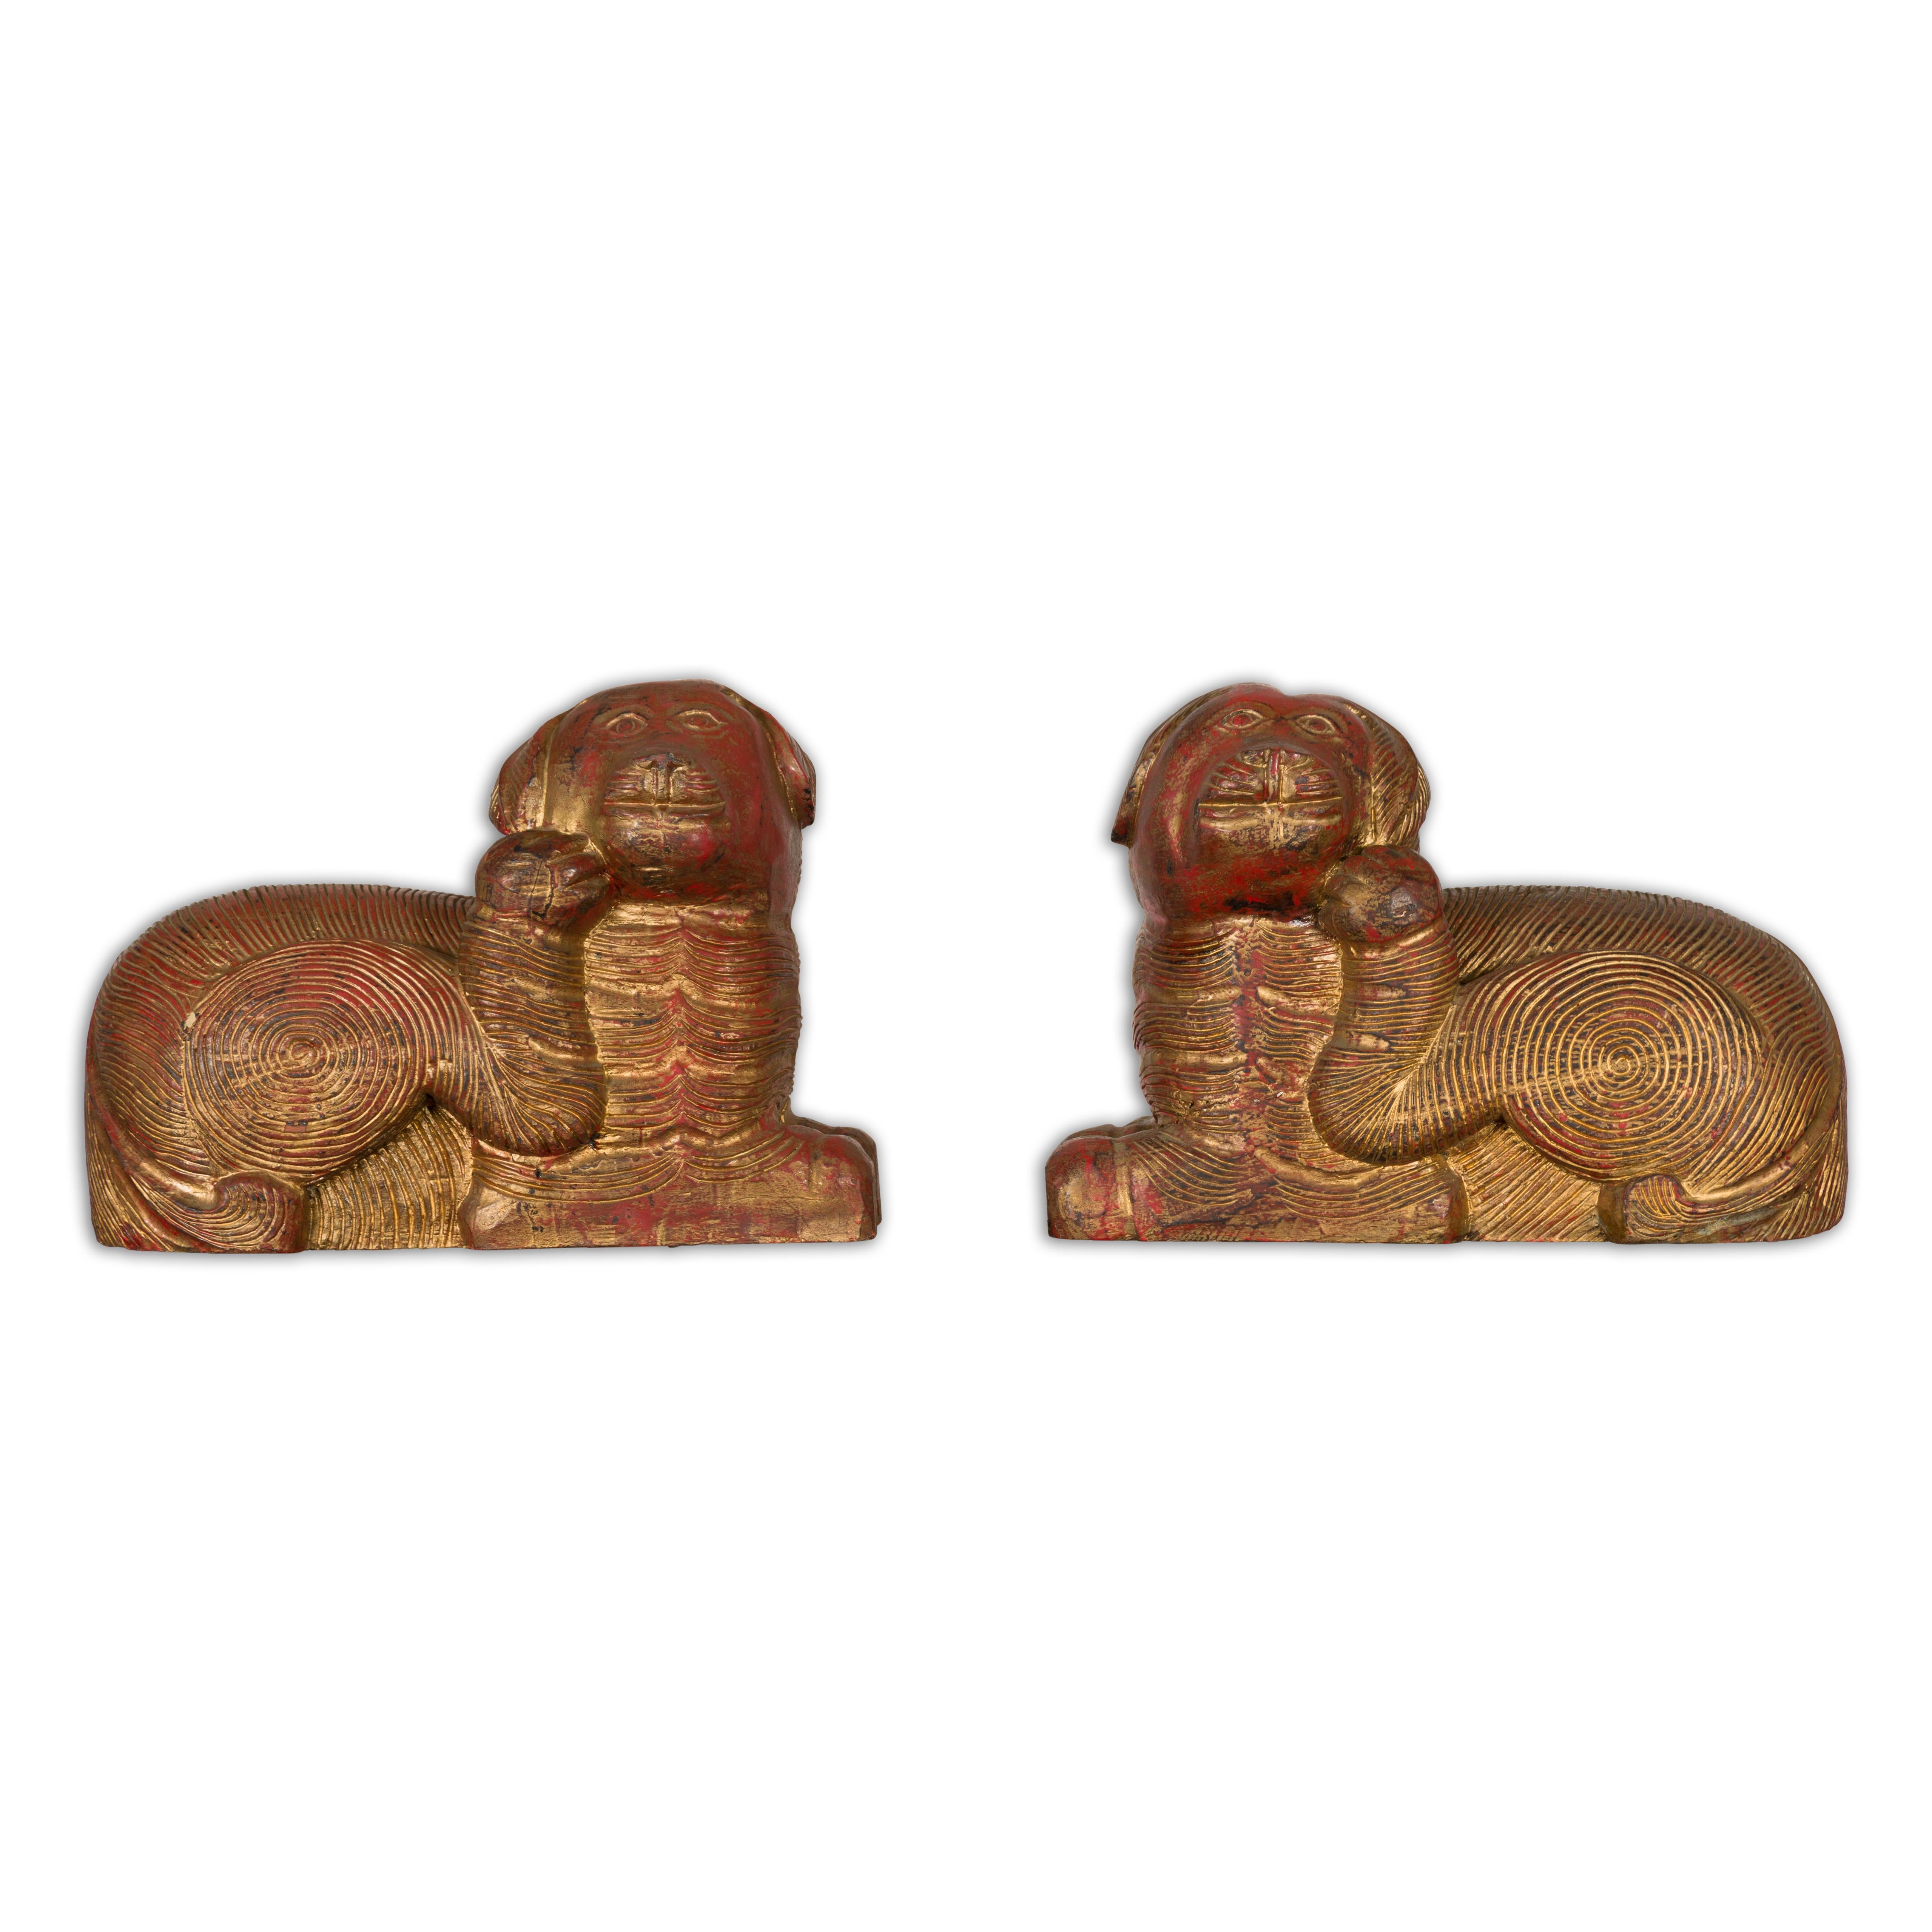 Vintage Pair of Pendant Thai Gilt Wood Mythological Creatures with Red Undertone For Sale 10